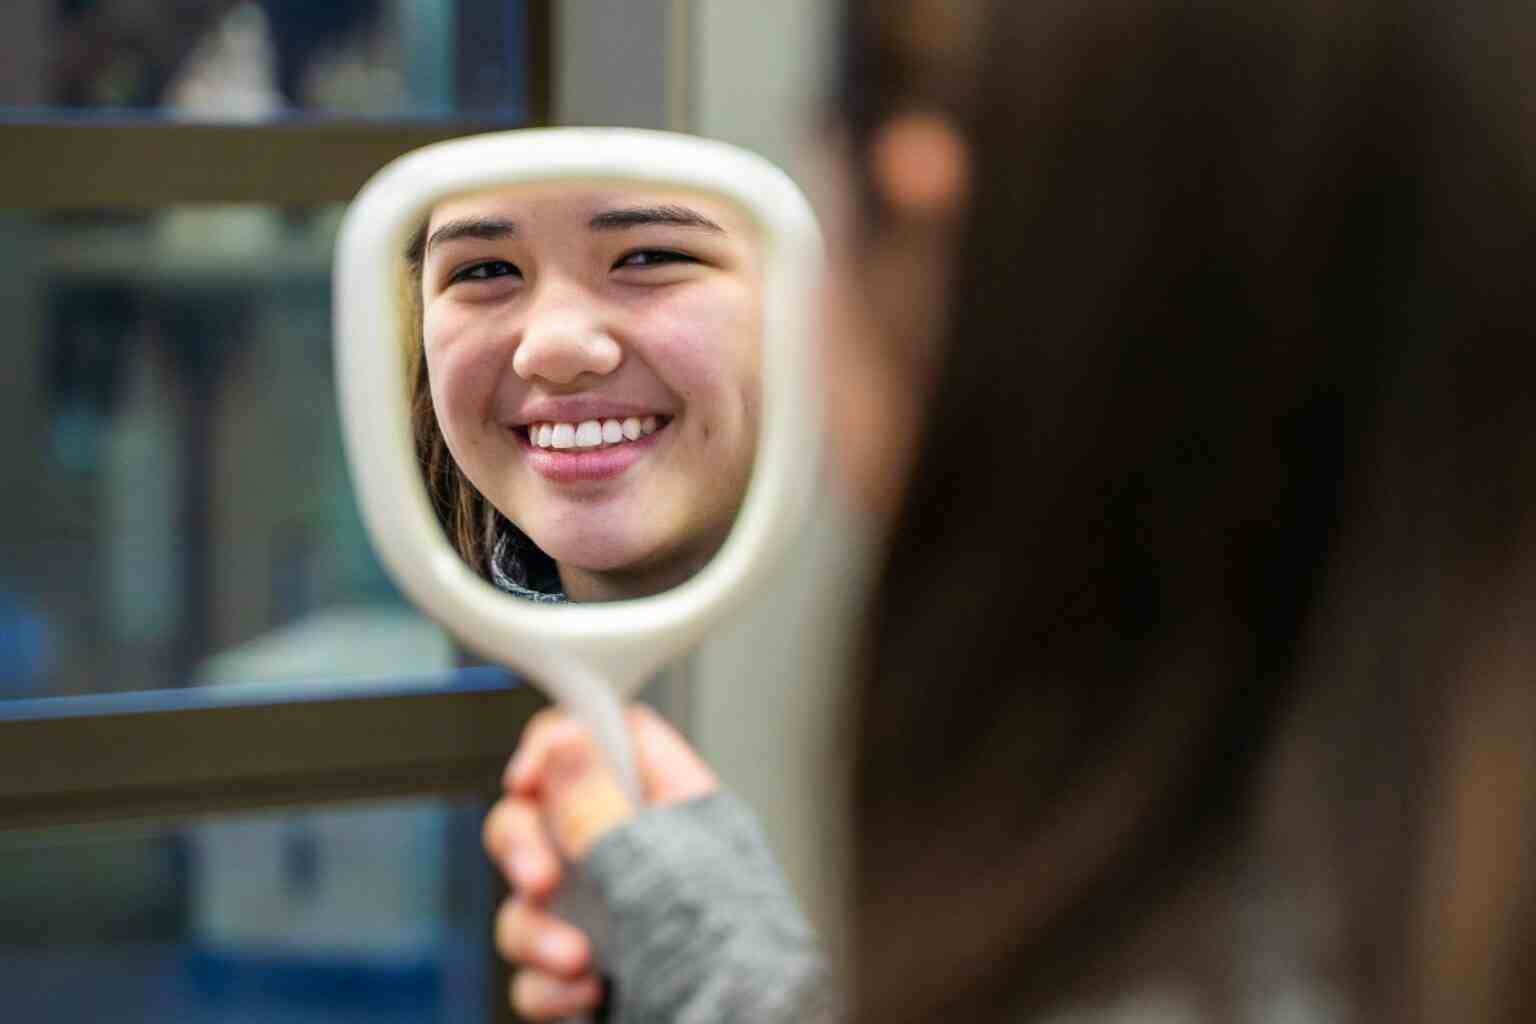 A woman is looking at herself in a mirror.